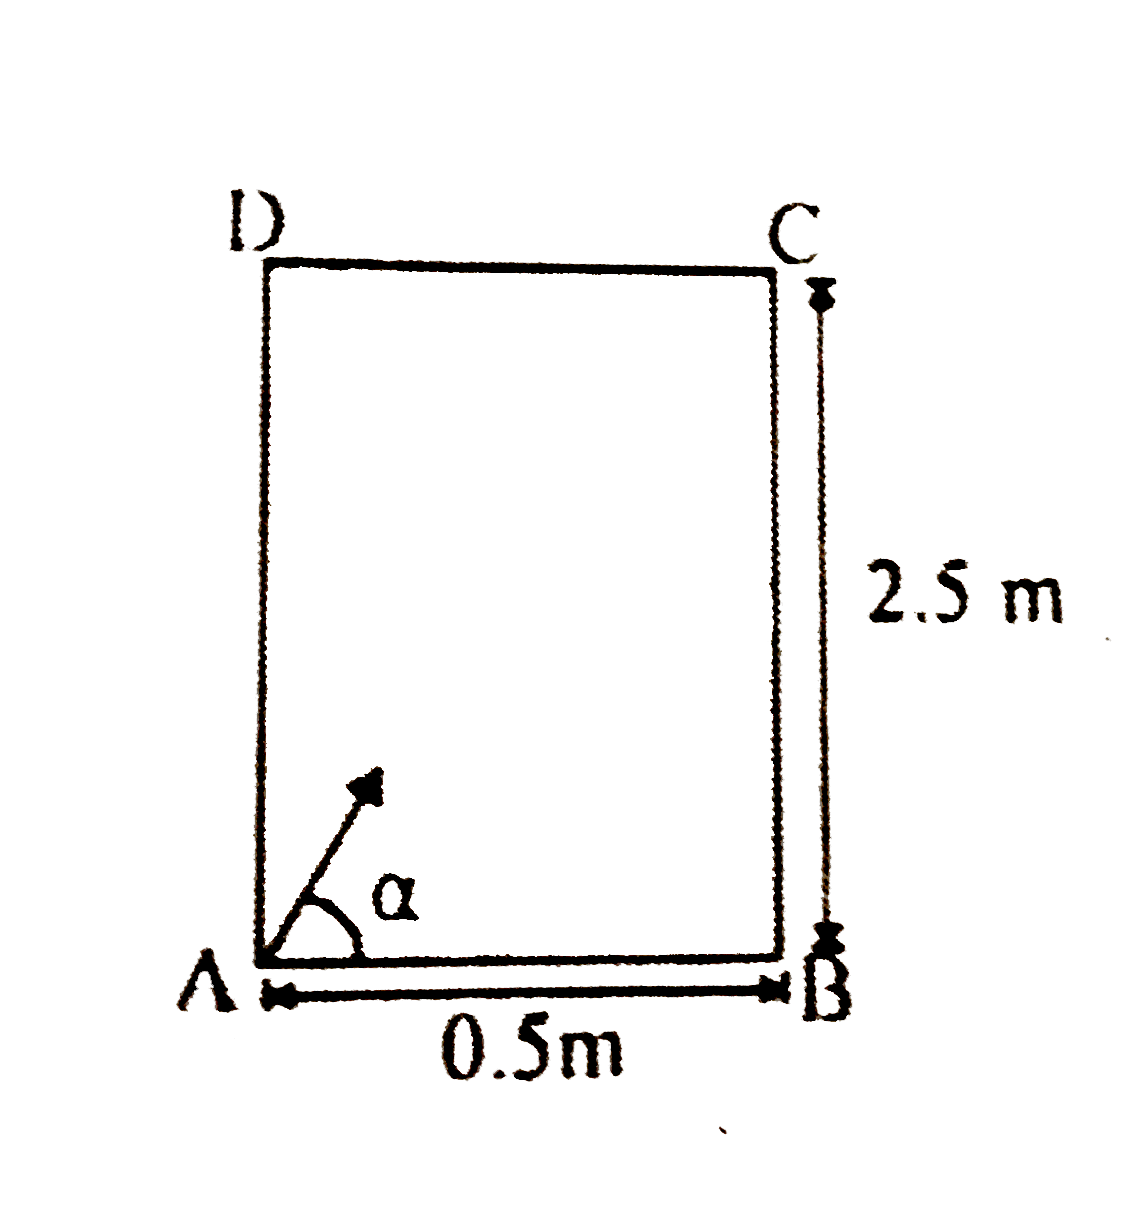 A cuboidal elevator cabon is shown in the figure. A ball is thrown from point A on the floor of cabon when the elevator is falling under gravity. The plane of motions is ABCD and the angle of projection of the ball with AB, relative to elevator, if the ball collides with point C, is alpha. Then find the value of tan alpha.